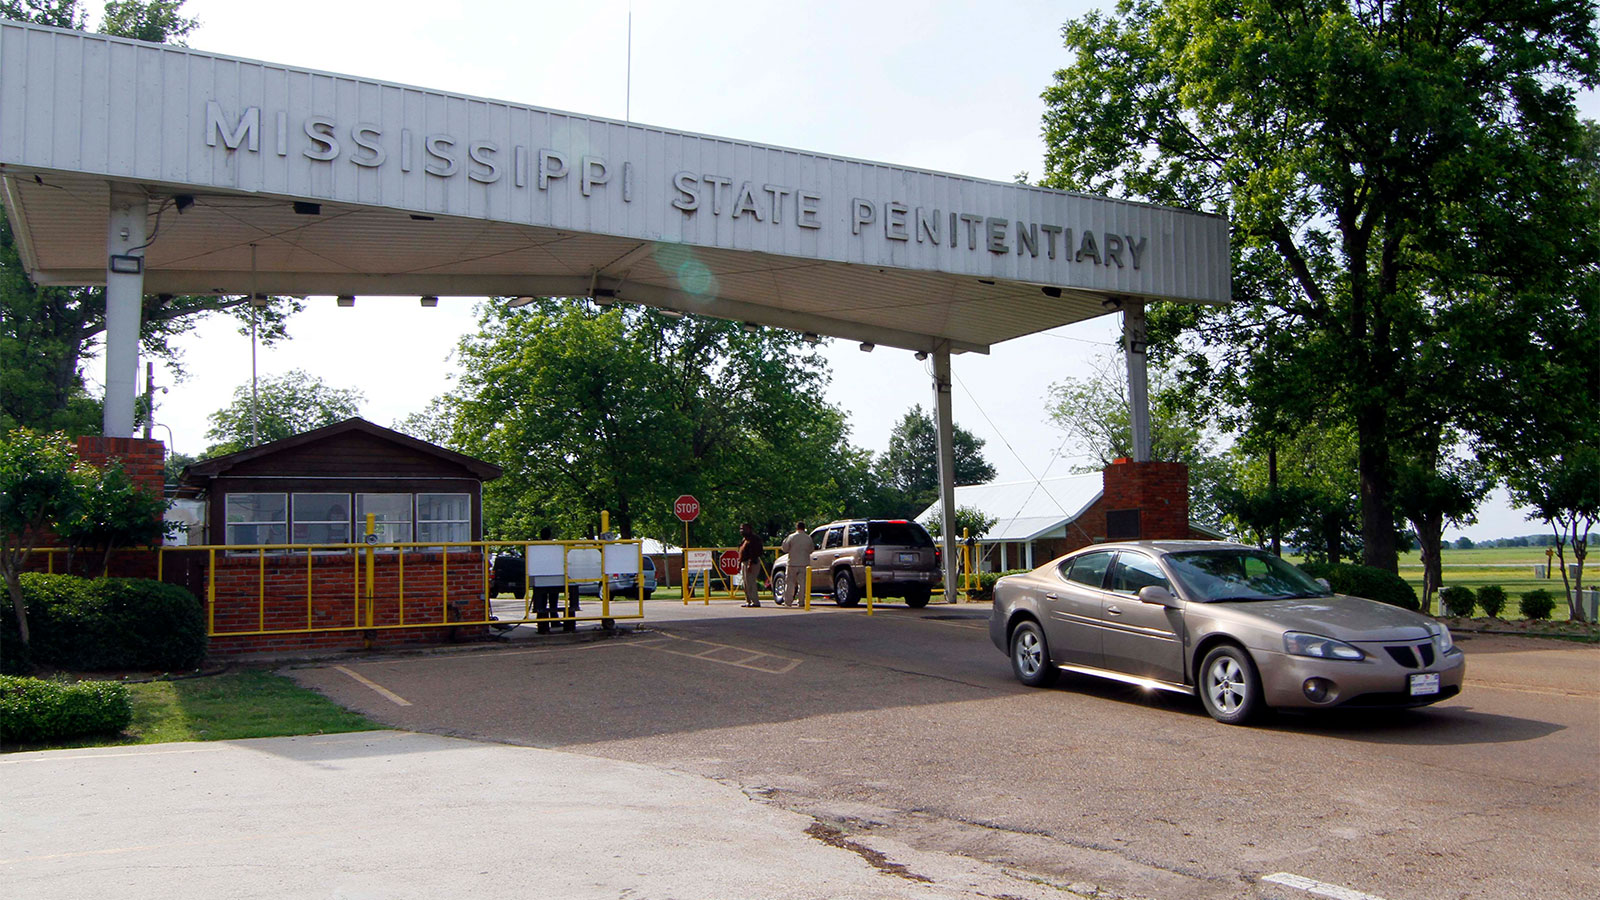 The entrance gate to Mississippi State Penitentiary